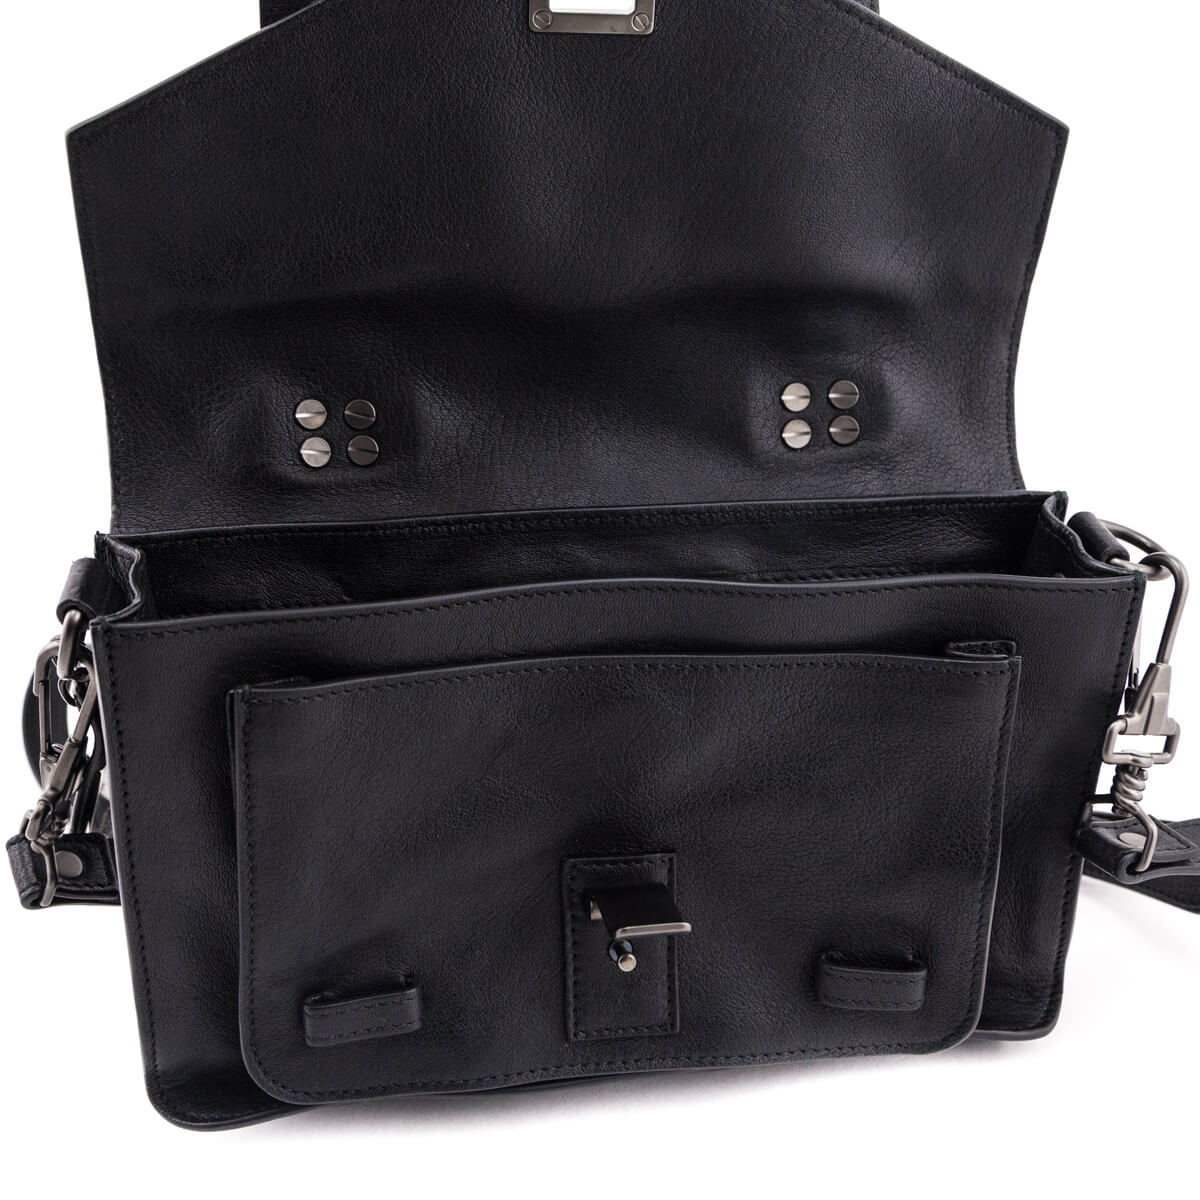 Proenza Schouler Black Lambskin Tiny PS1 Satchel - Love that Bag etc - Preowned Authentic Designer Handbags & Preloved Fashions